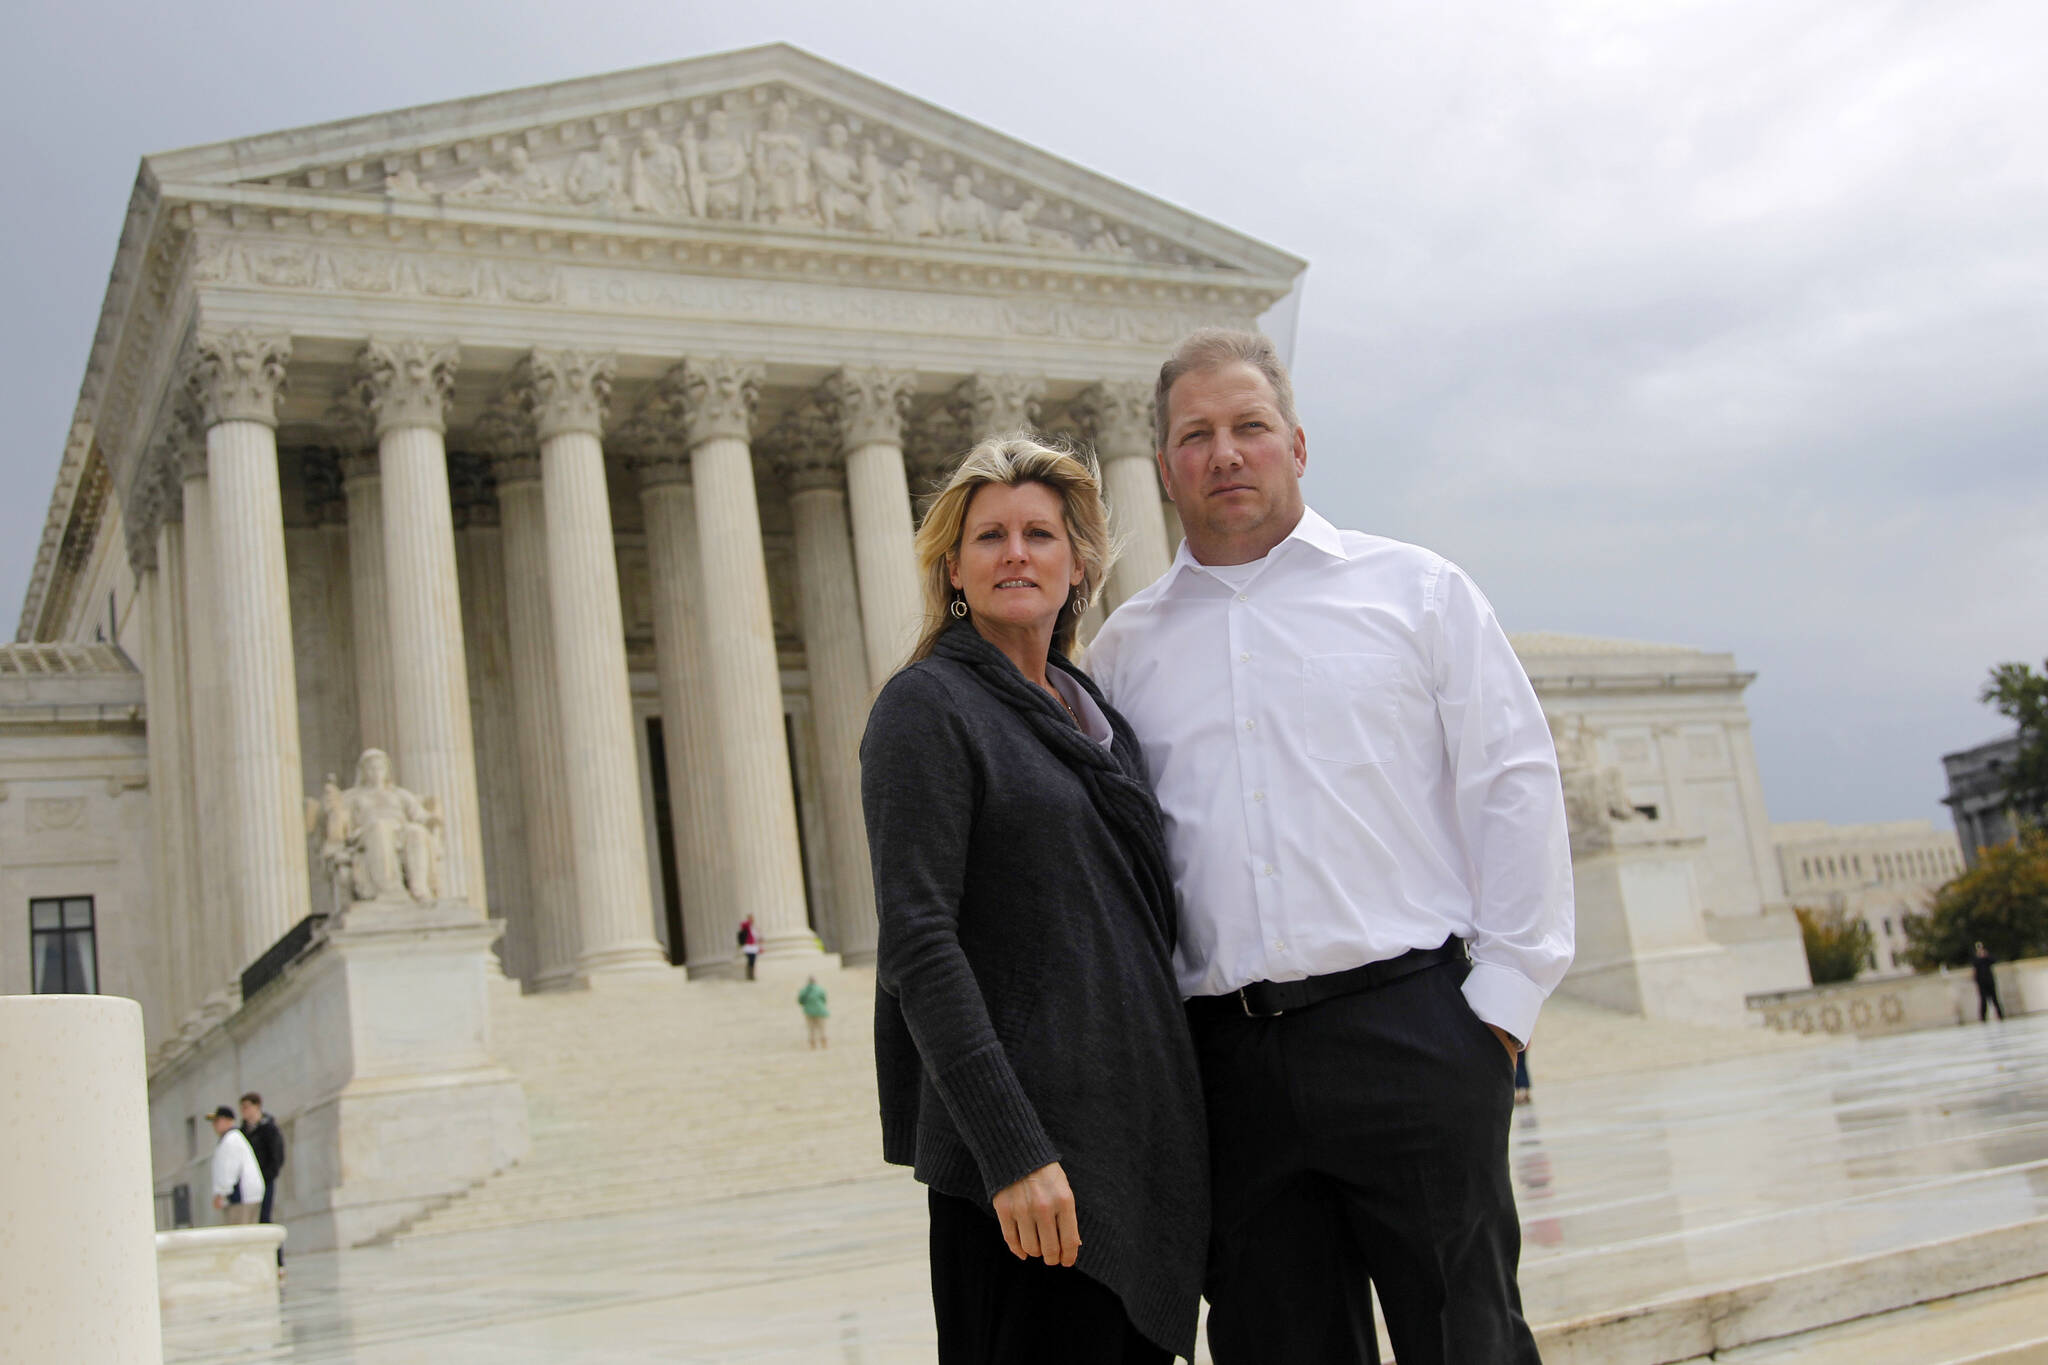 Michael and Chantell Sackett of Priest Lake, Idaho, pose for a photo in front of the Supreme Court in Washington on Oct. 14, 2011. The Supreme Court on Thursday, May 25, 2023, made it harder for the federal government to police water pollution in a decision that strips protections from wetlands that are isolated from larger bodies of water. The justices boosted property rights over concerns about clean water in a ruling in favor of an Idaho couple who sought to build a house near Priest Lake in the state’s panhandle. (AP Photo / Haraz N. Ghanbari)